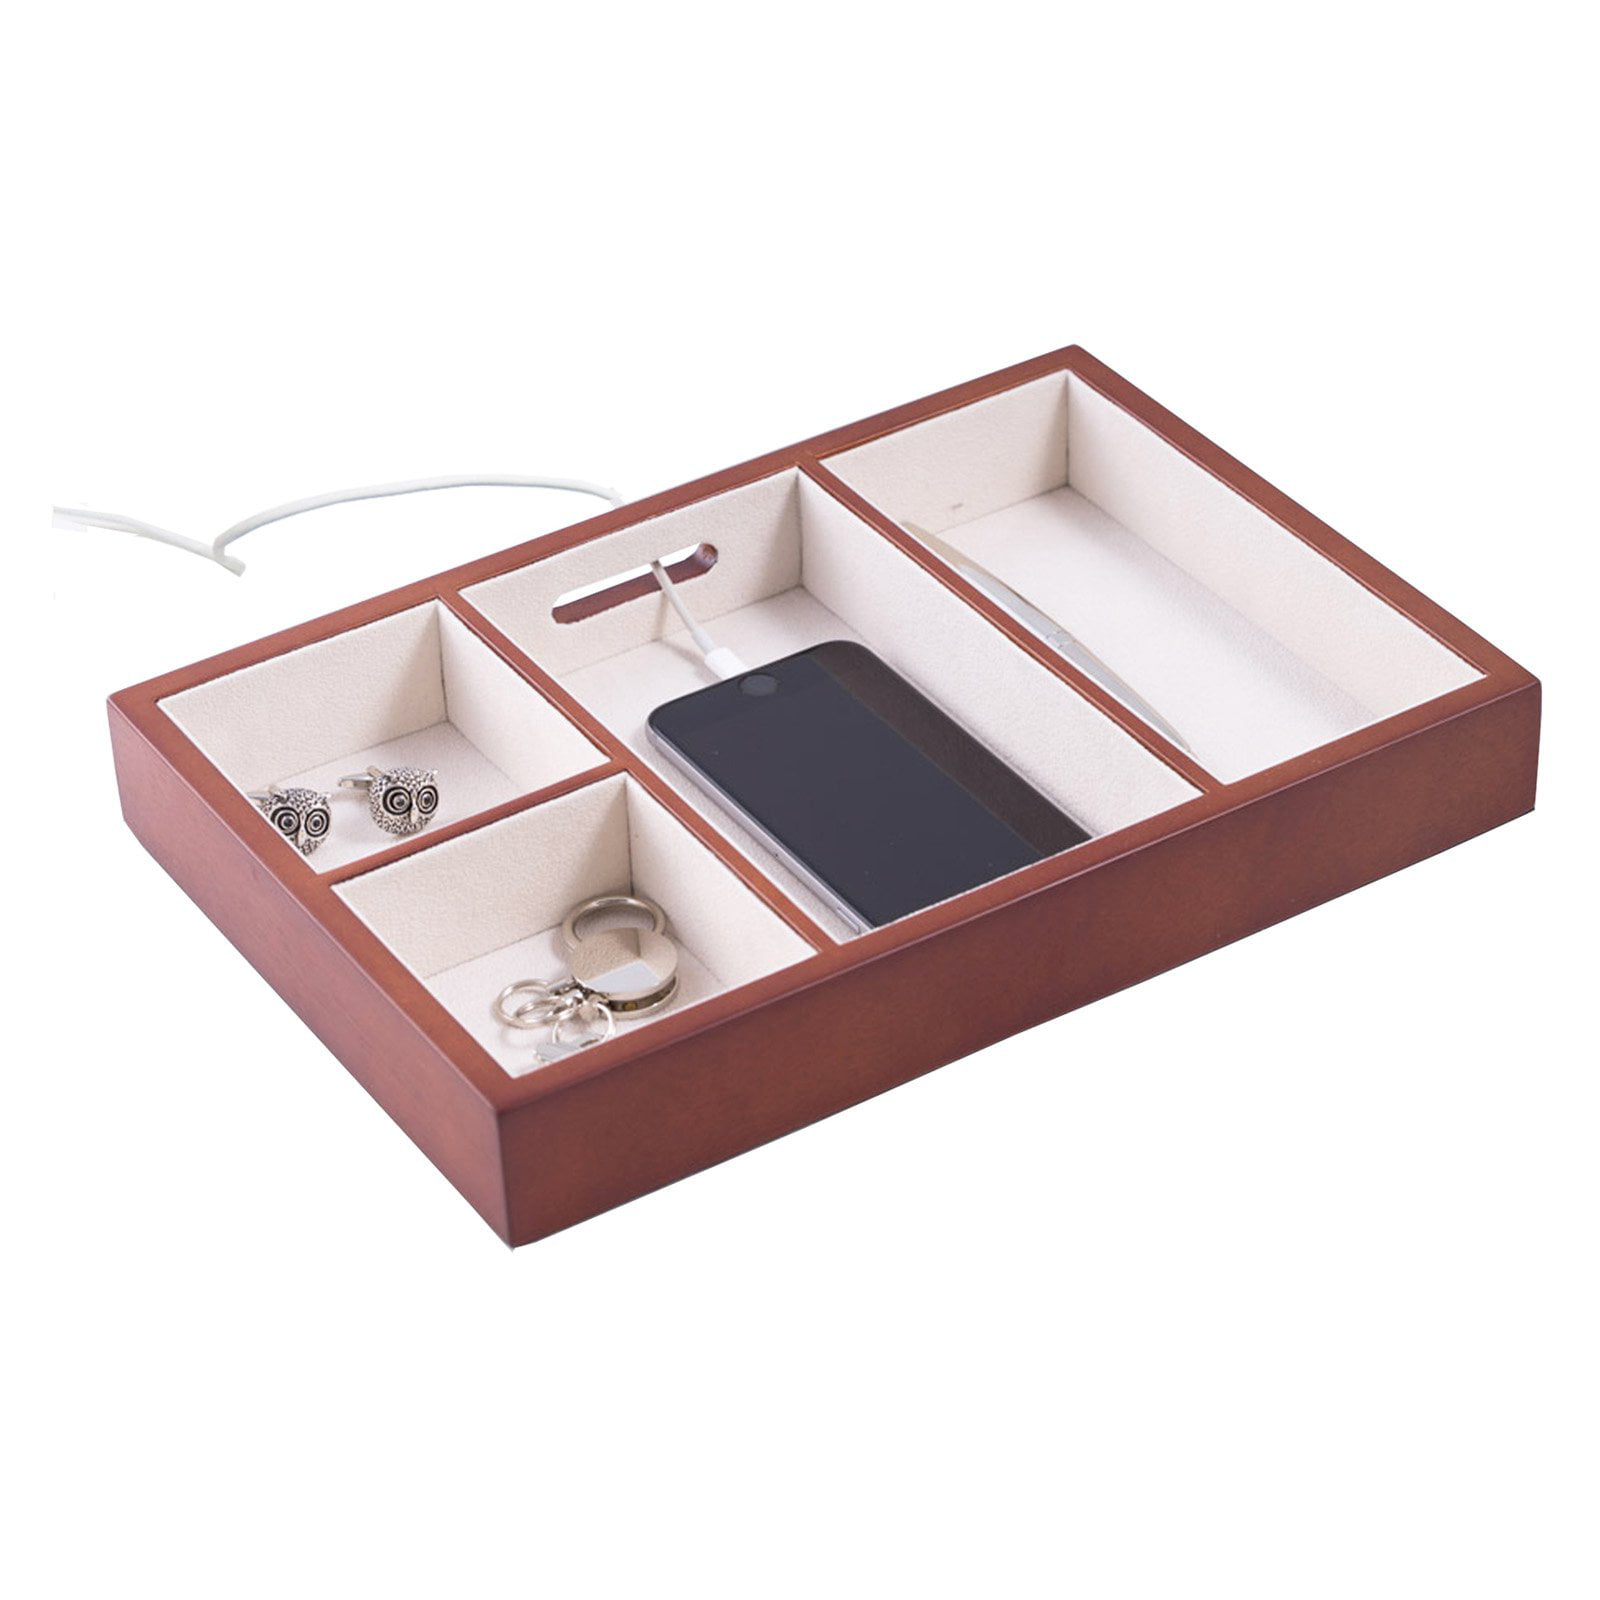 Bey-berk International Bb674brw Cherry Wood Open Valet With Soft Velour Lining & Opening For Charging Cords - Brown